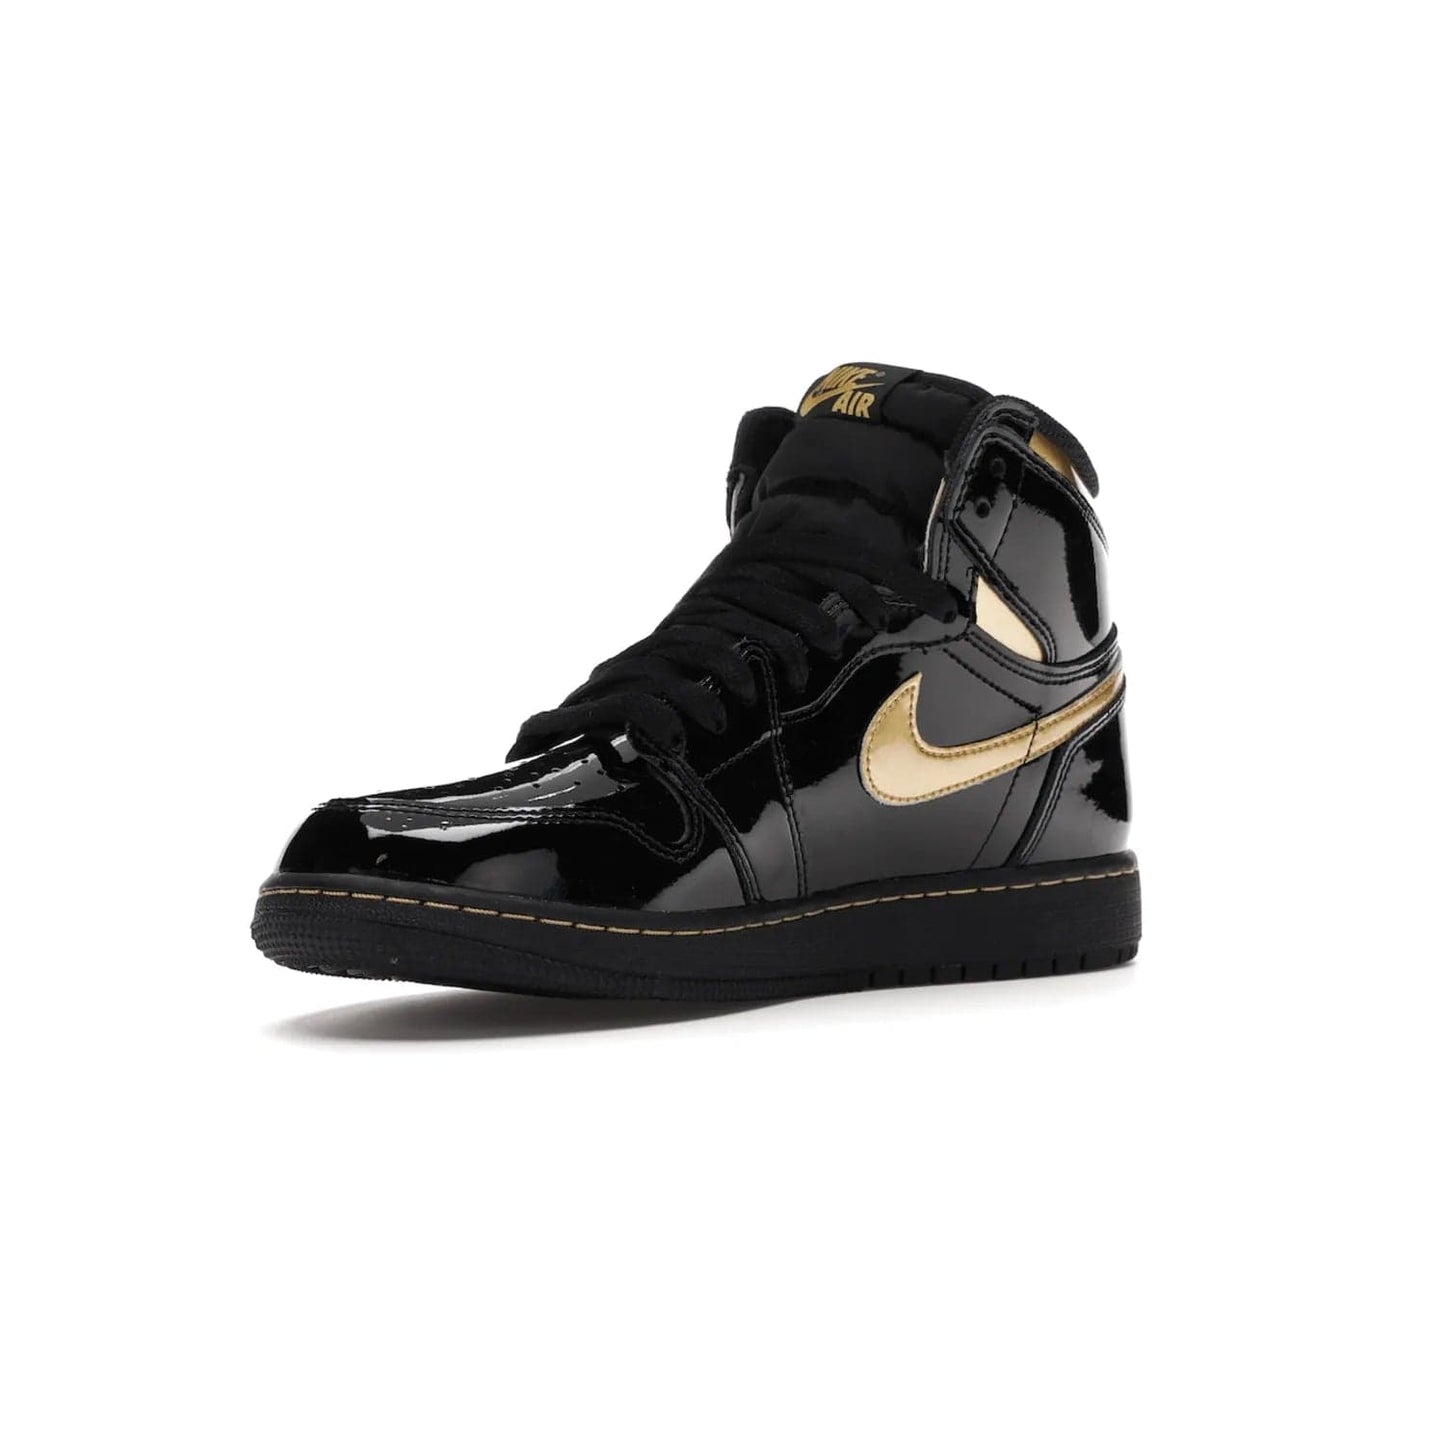 Jordan 1 Retro High Black Metallic Gold (2020) (GS) - Image 15 - Only at www.BallersClubKickz.com - Shop the Kids Air Jordan 1 Retro High in Black Metallic Gold for a stylish and comfortable sneaker kids can love. Featuring black and metallic gold patent leather uppers, metallic gold accents, and an Air sole unit for extra cushioning.